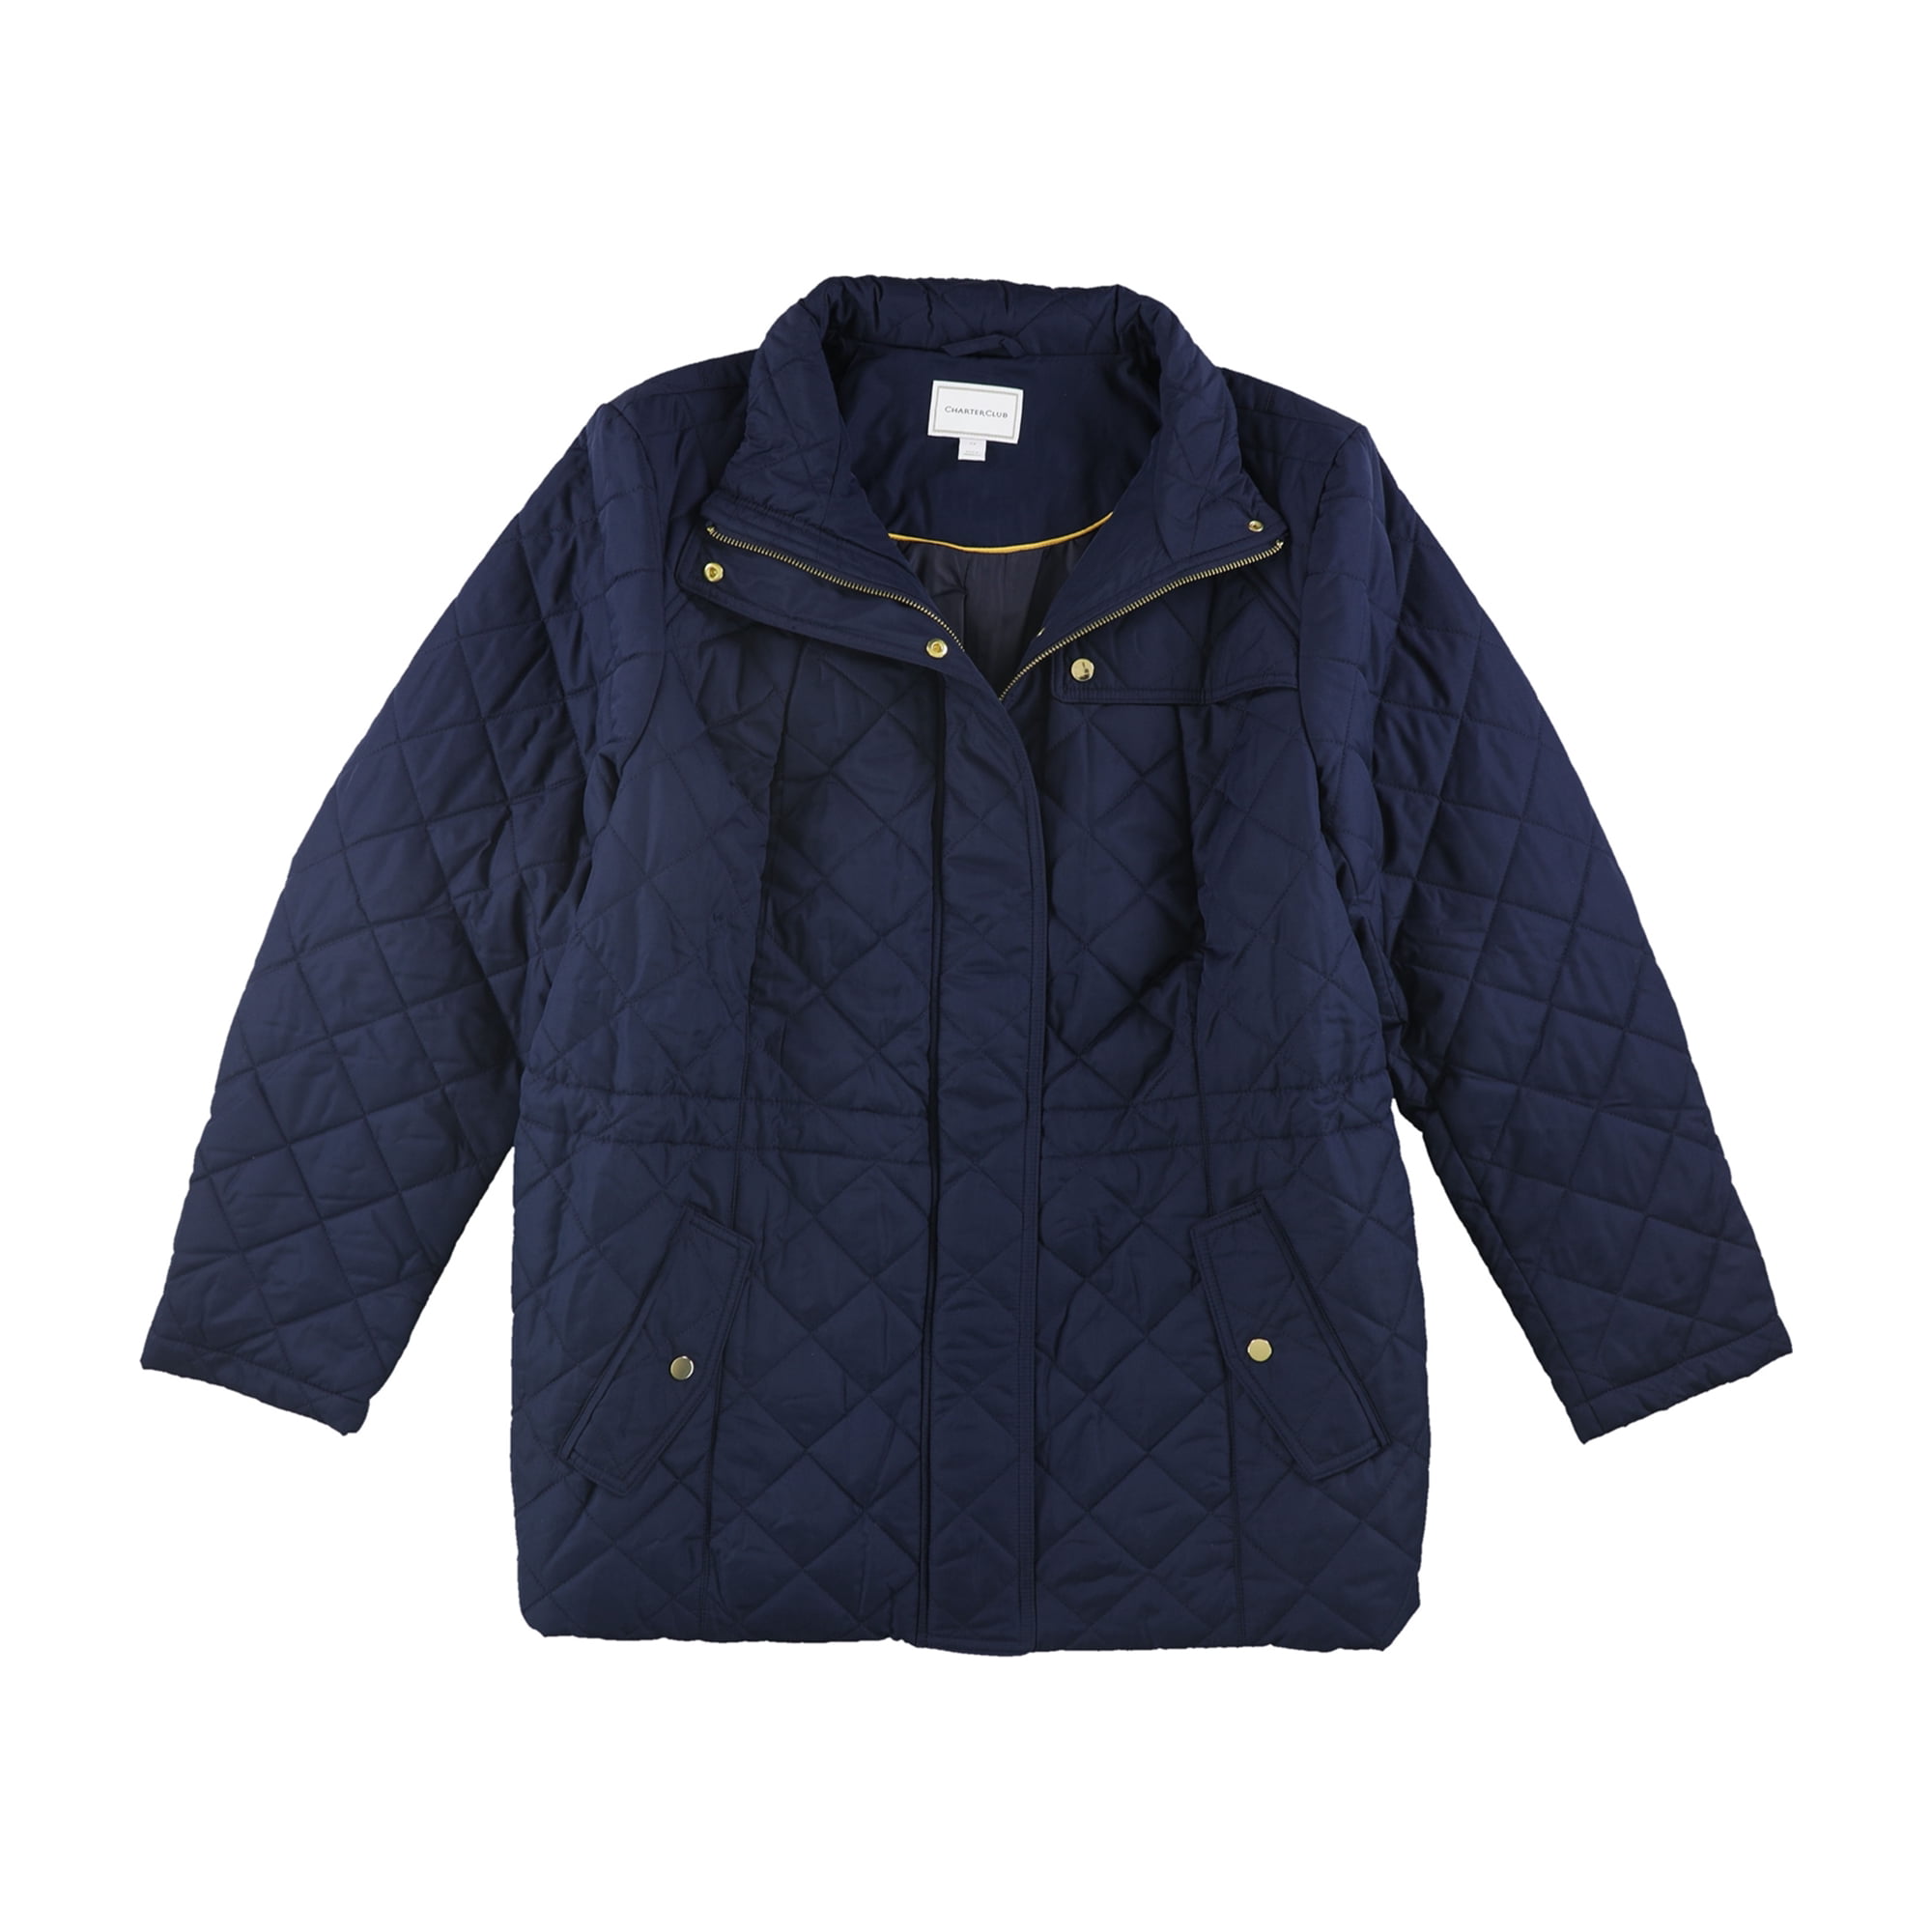 Charter Club - Charter Club Womens Core Quilted Jacket - Walmart.com ...